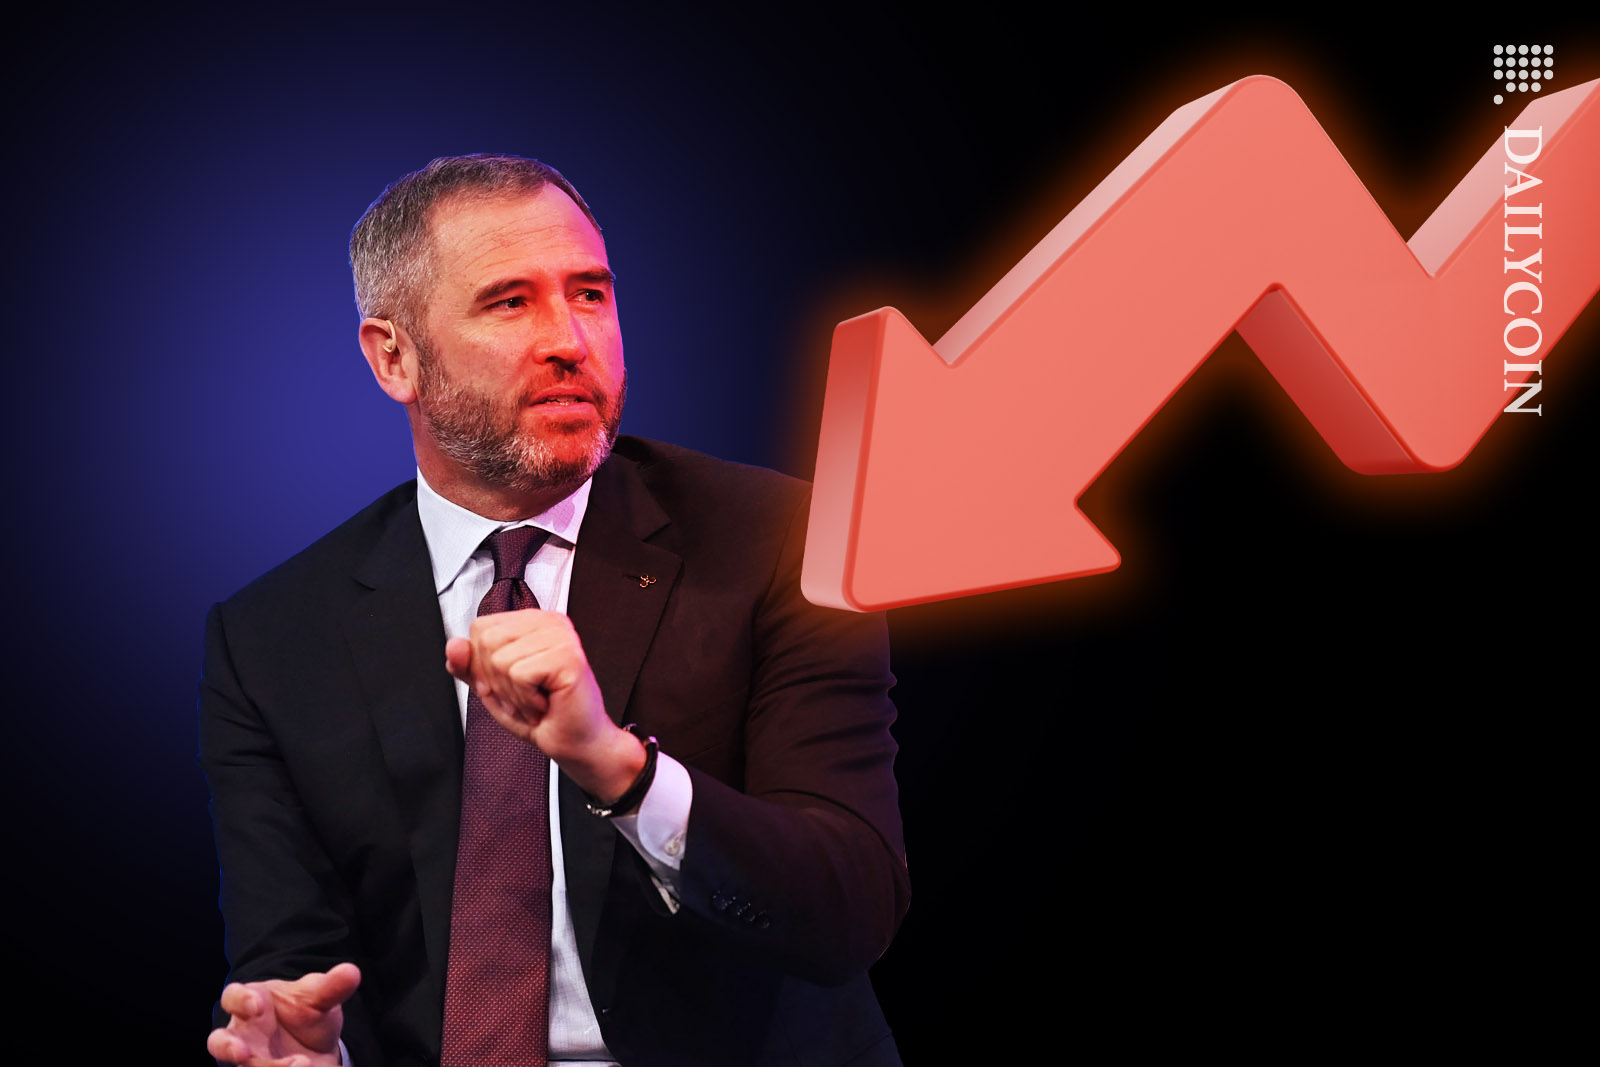 Brad Garlinghouse looking worried about a big red downward arrow next to him.